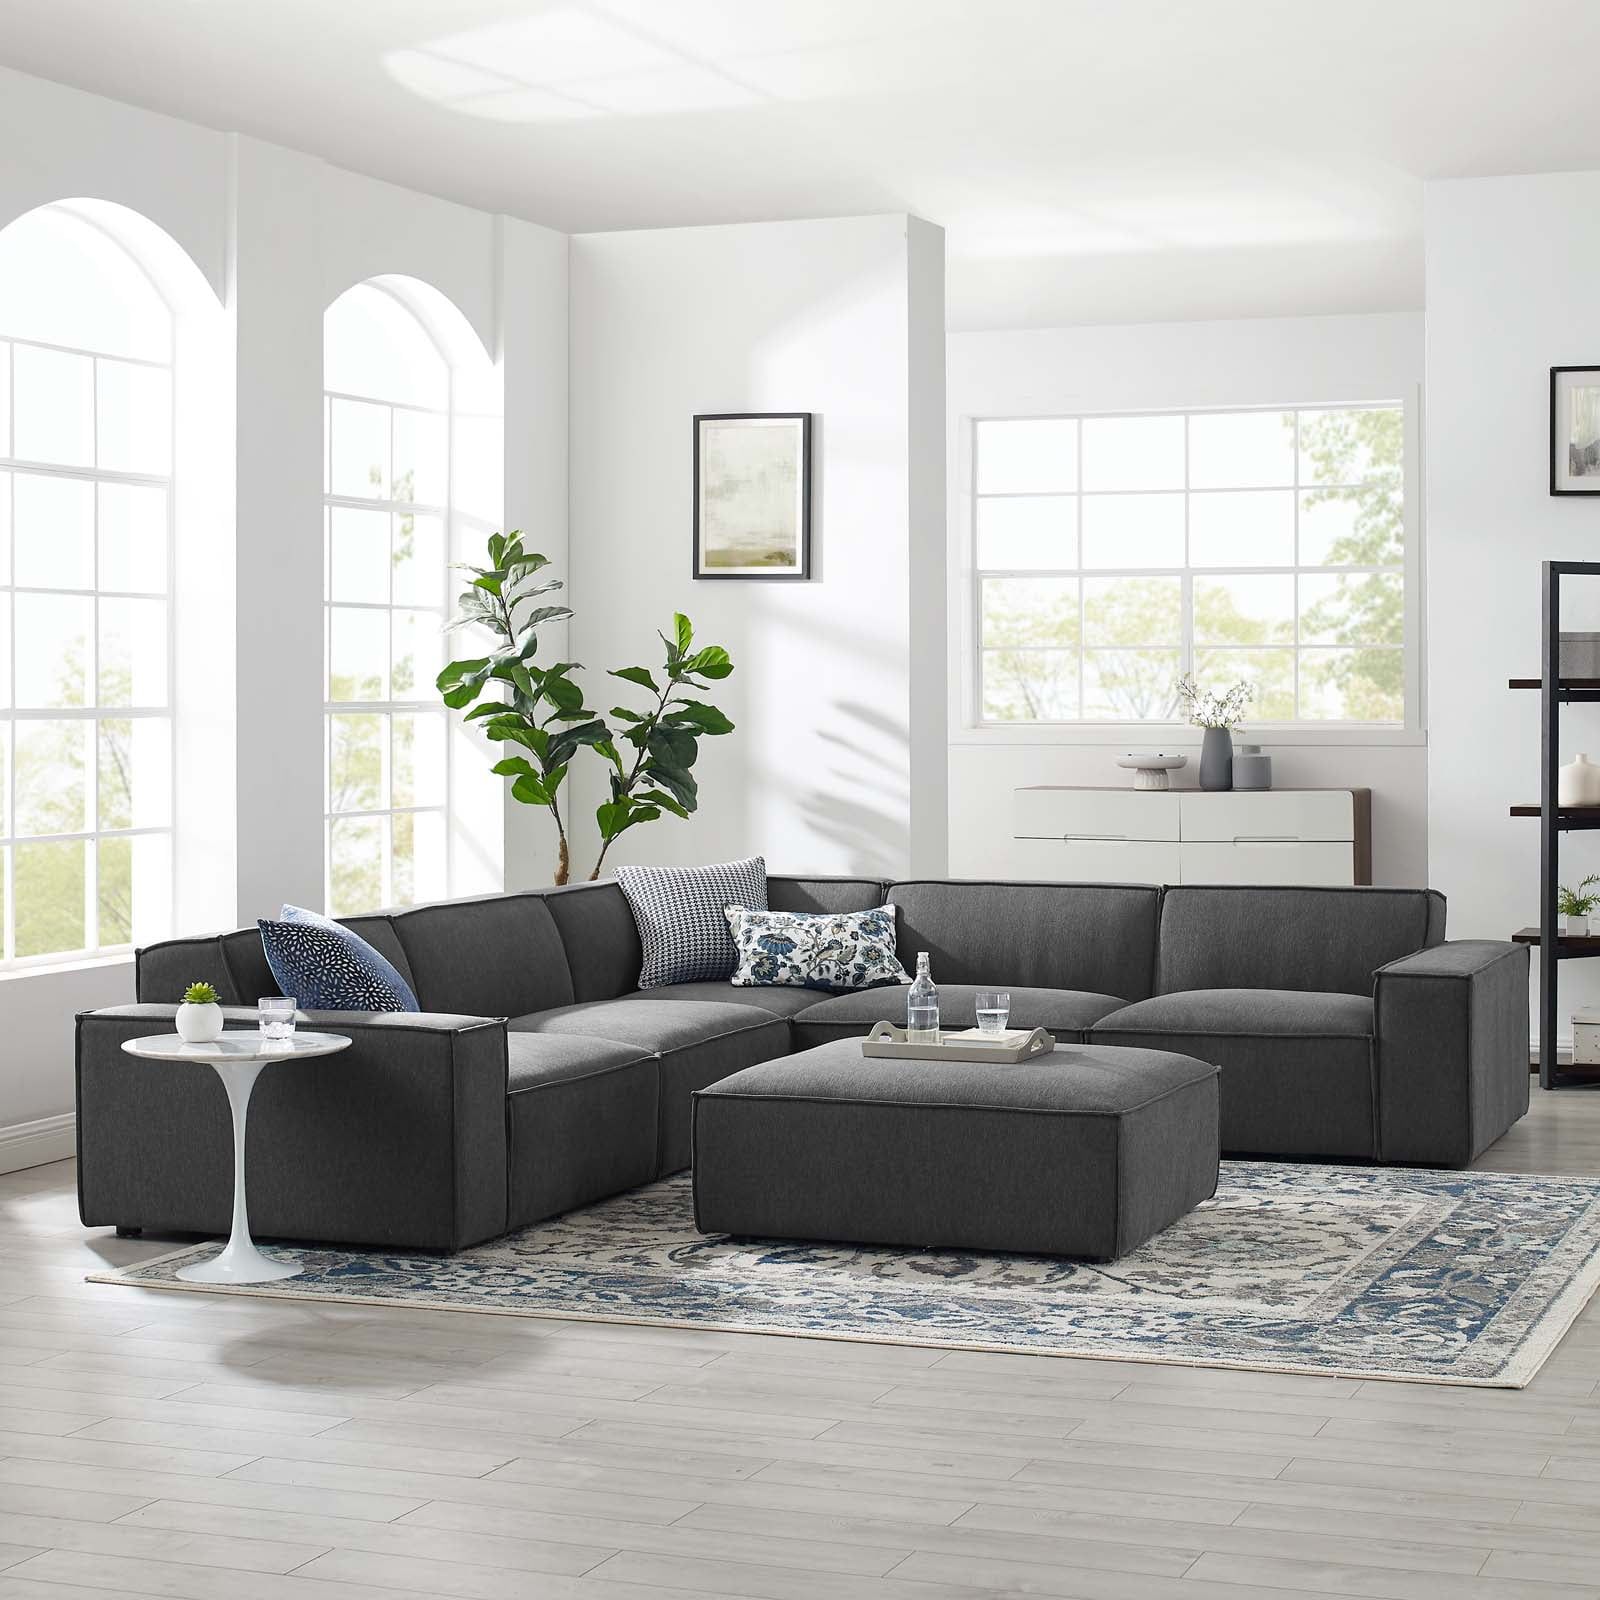 Modway Restore 6 Piece Sectional Sofa, Multiple Colors – Walmart Pertaining To Sofas In Multiple Colors (View 3 of 20)